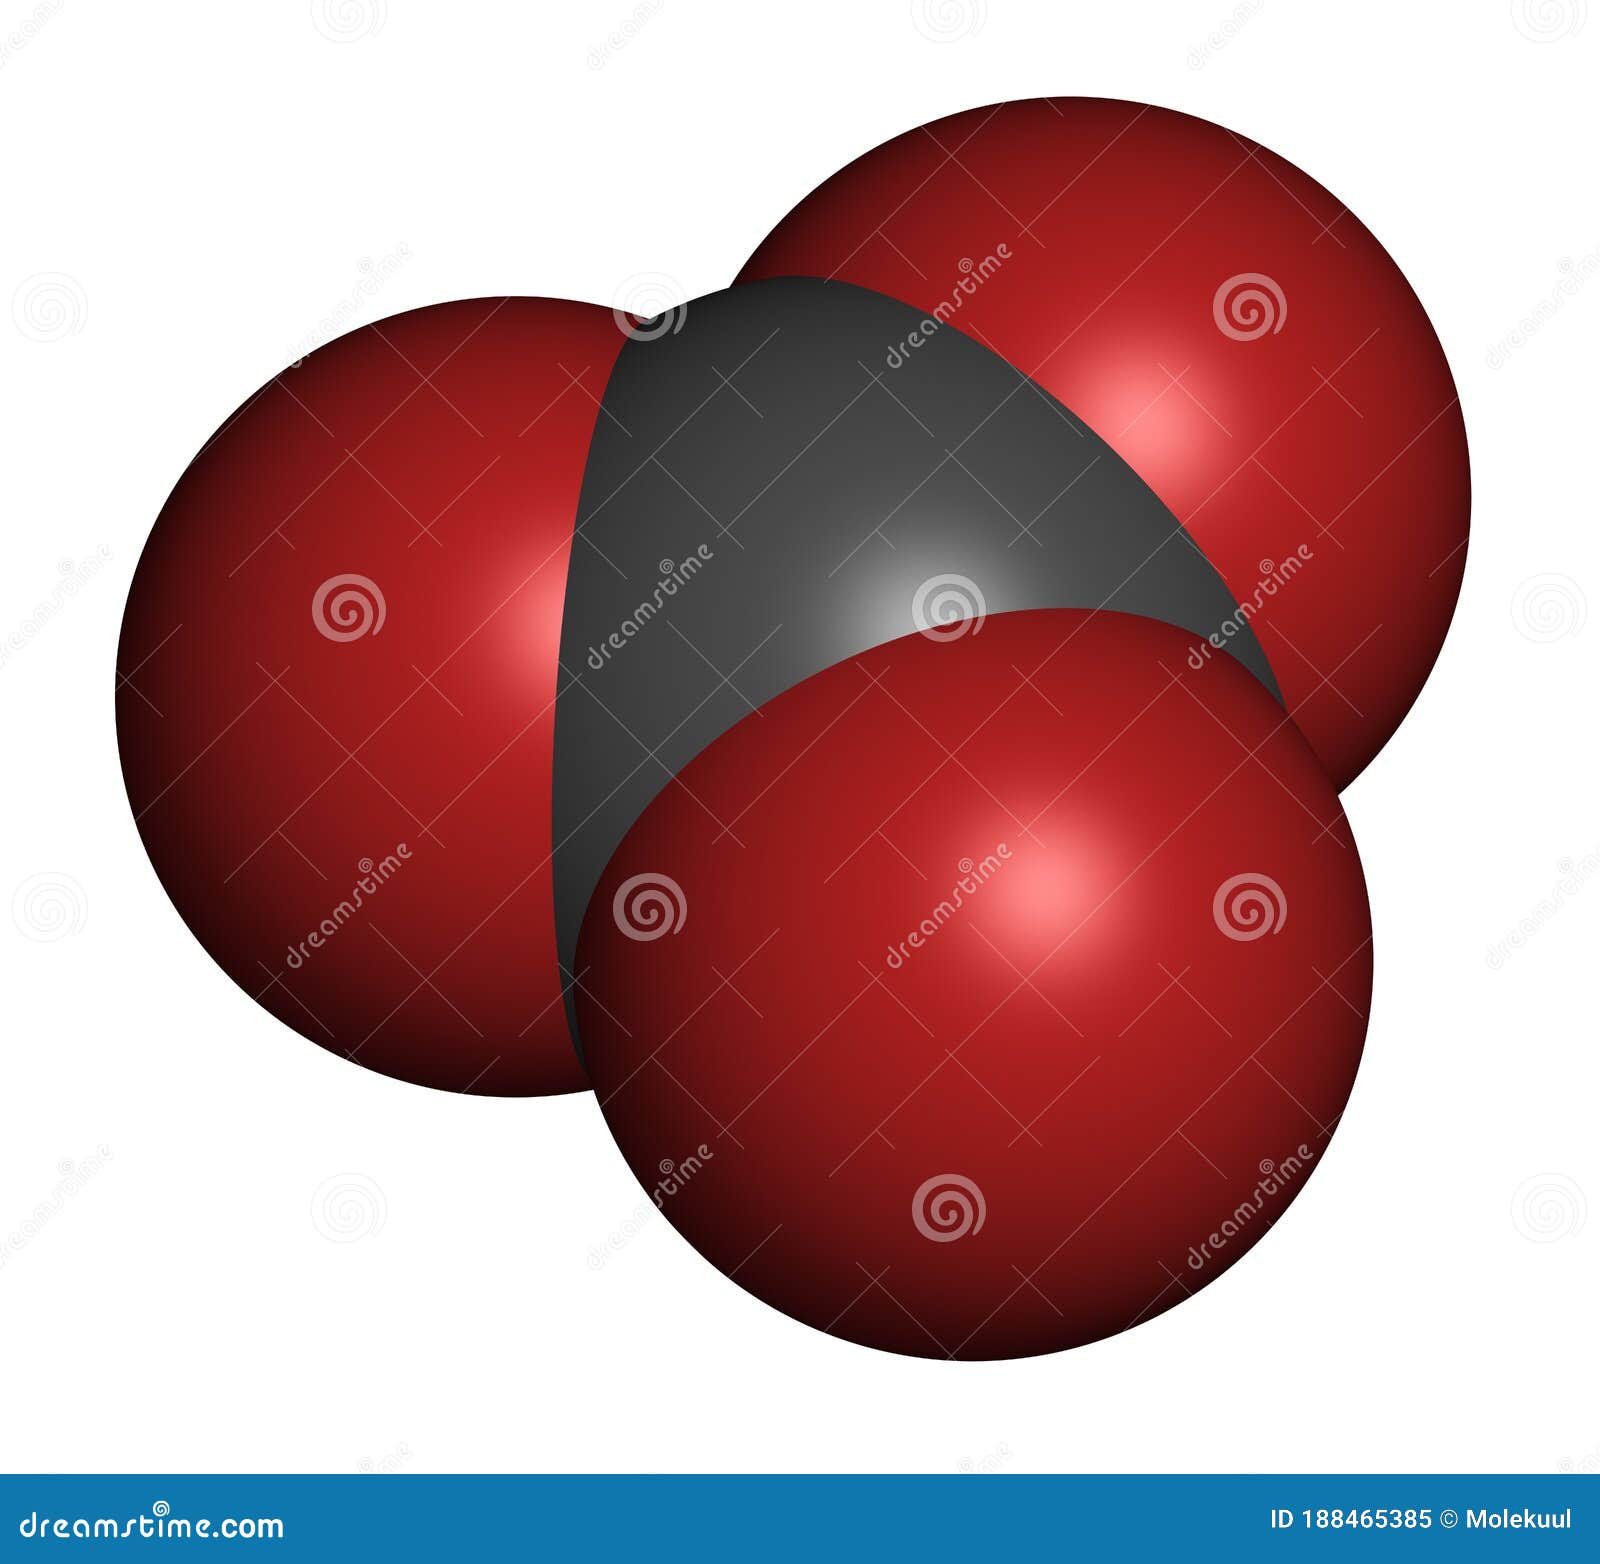 carbonate anion, chemical structure. 3d rendering. atoms are represented as spheres with conventional color coding: carbon (grey